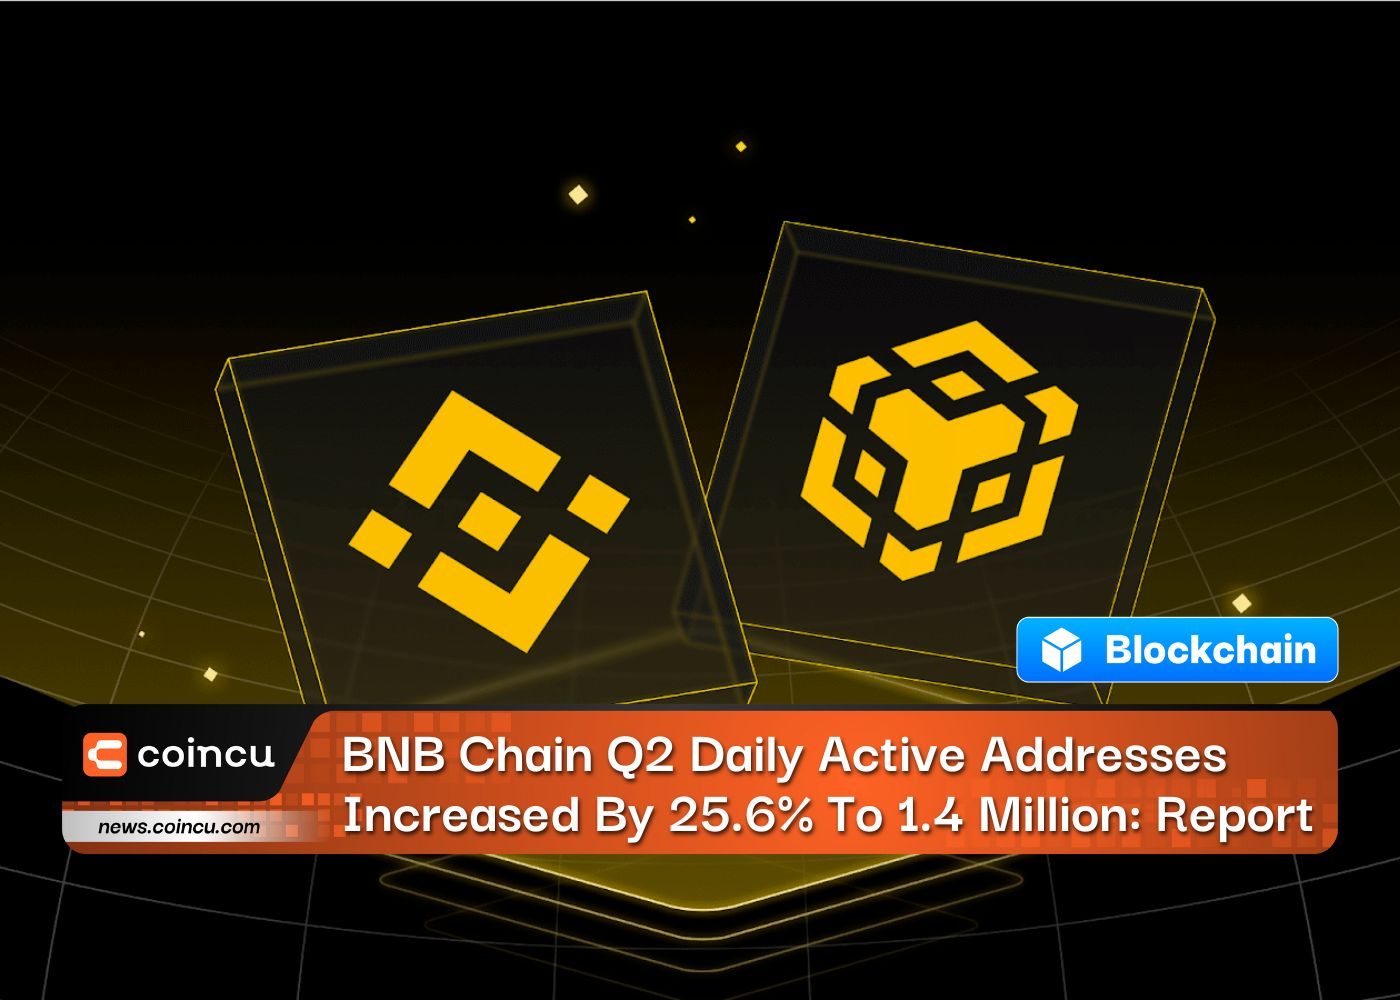 BNB Chain Q2 Daily Active Addresses Increased By 25.6% To 1.4 Million: Report